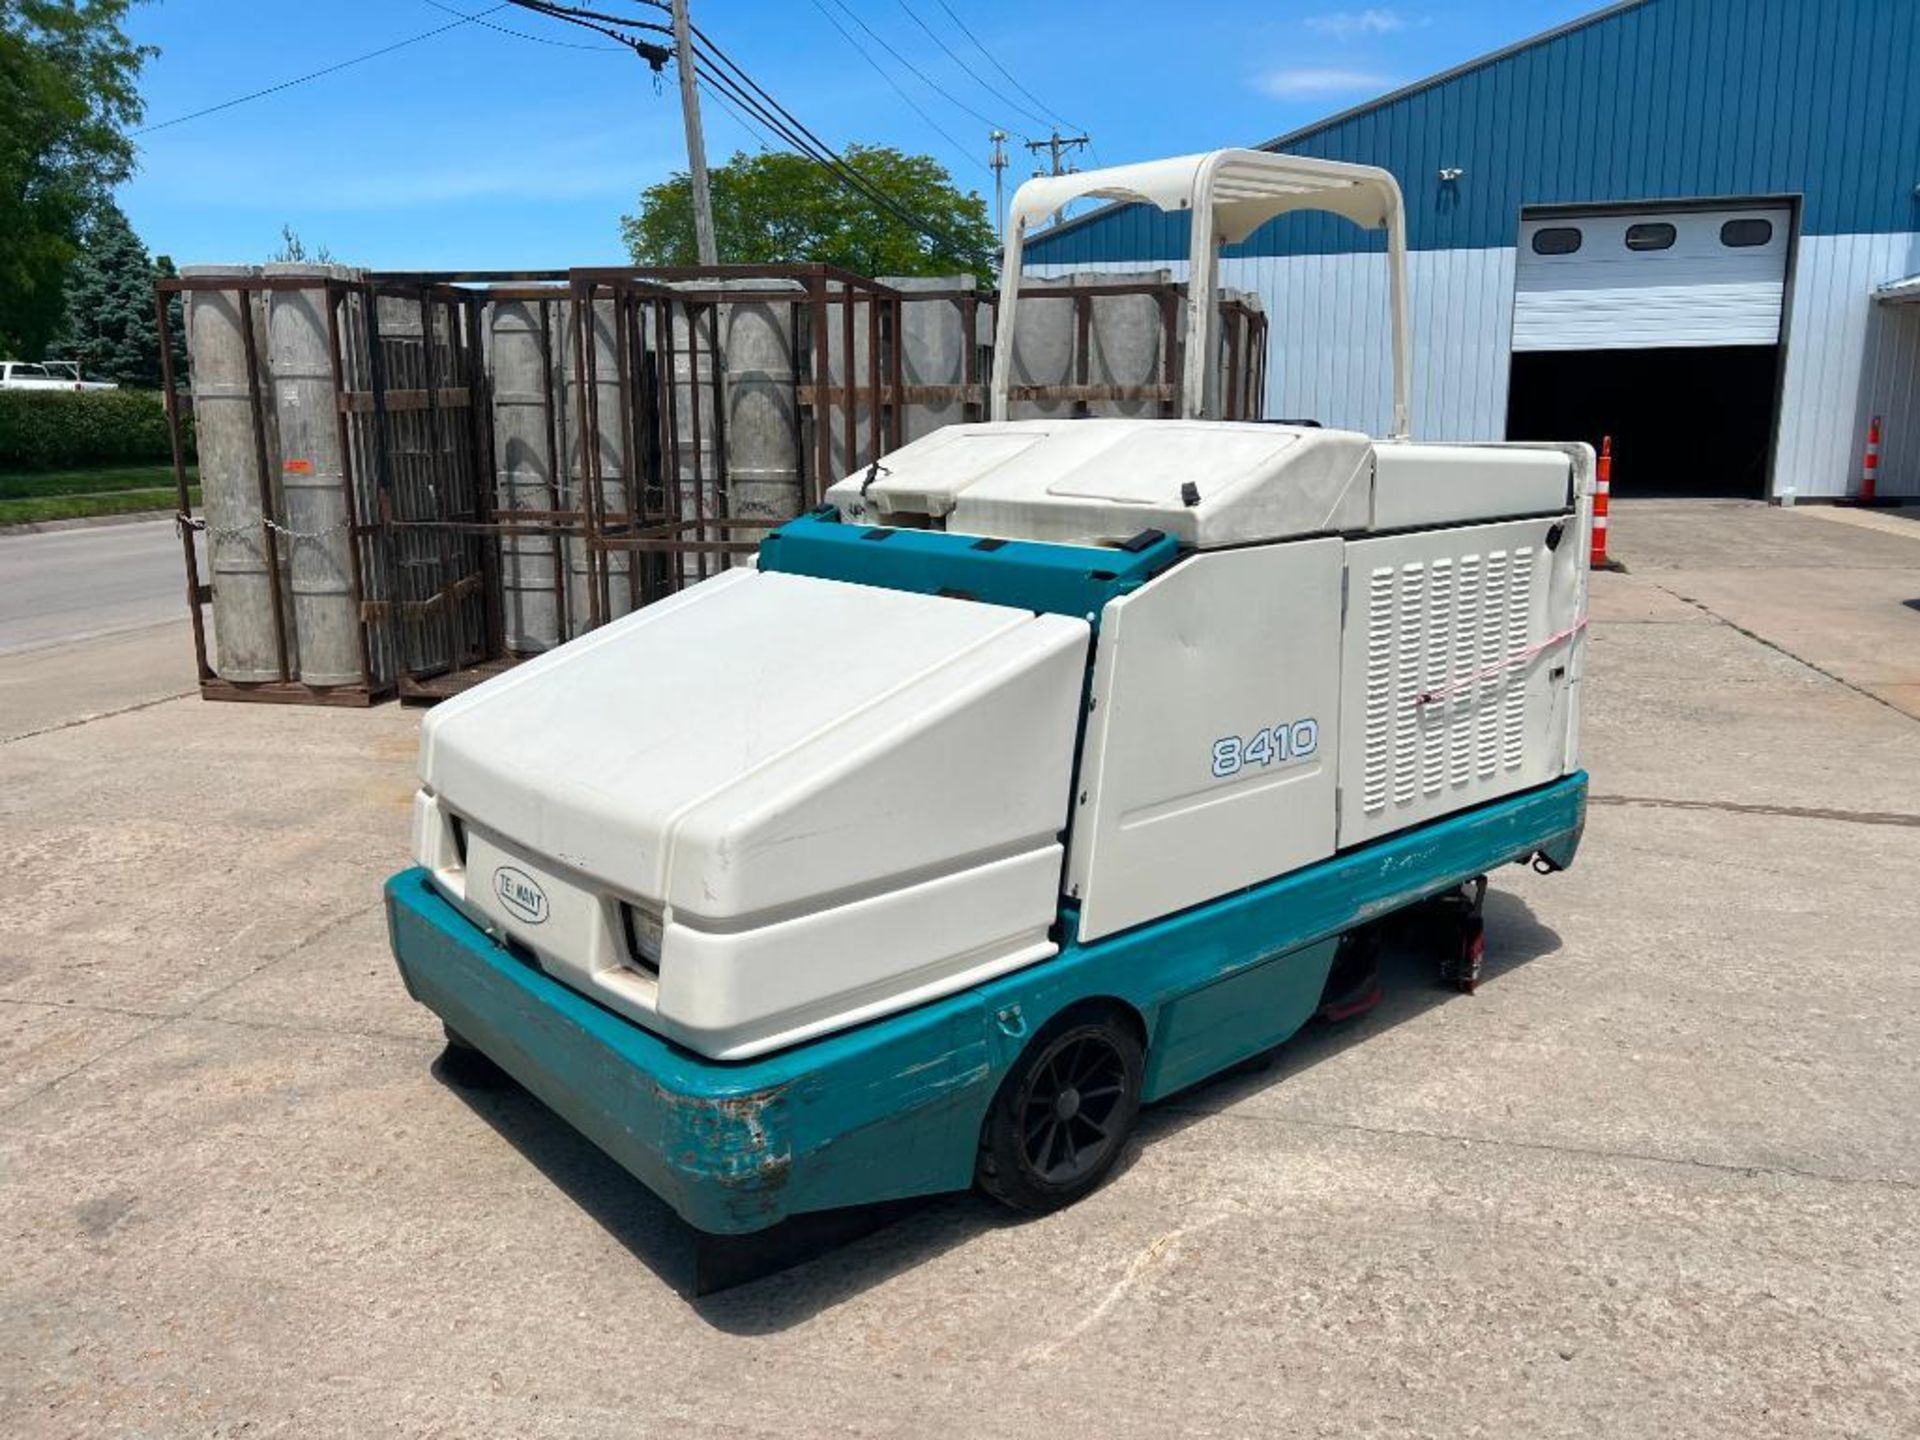 Tennant 8410 Sweeper/Scrubber. Located in Mt. Pleasant, IA - Image 4 of 27